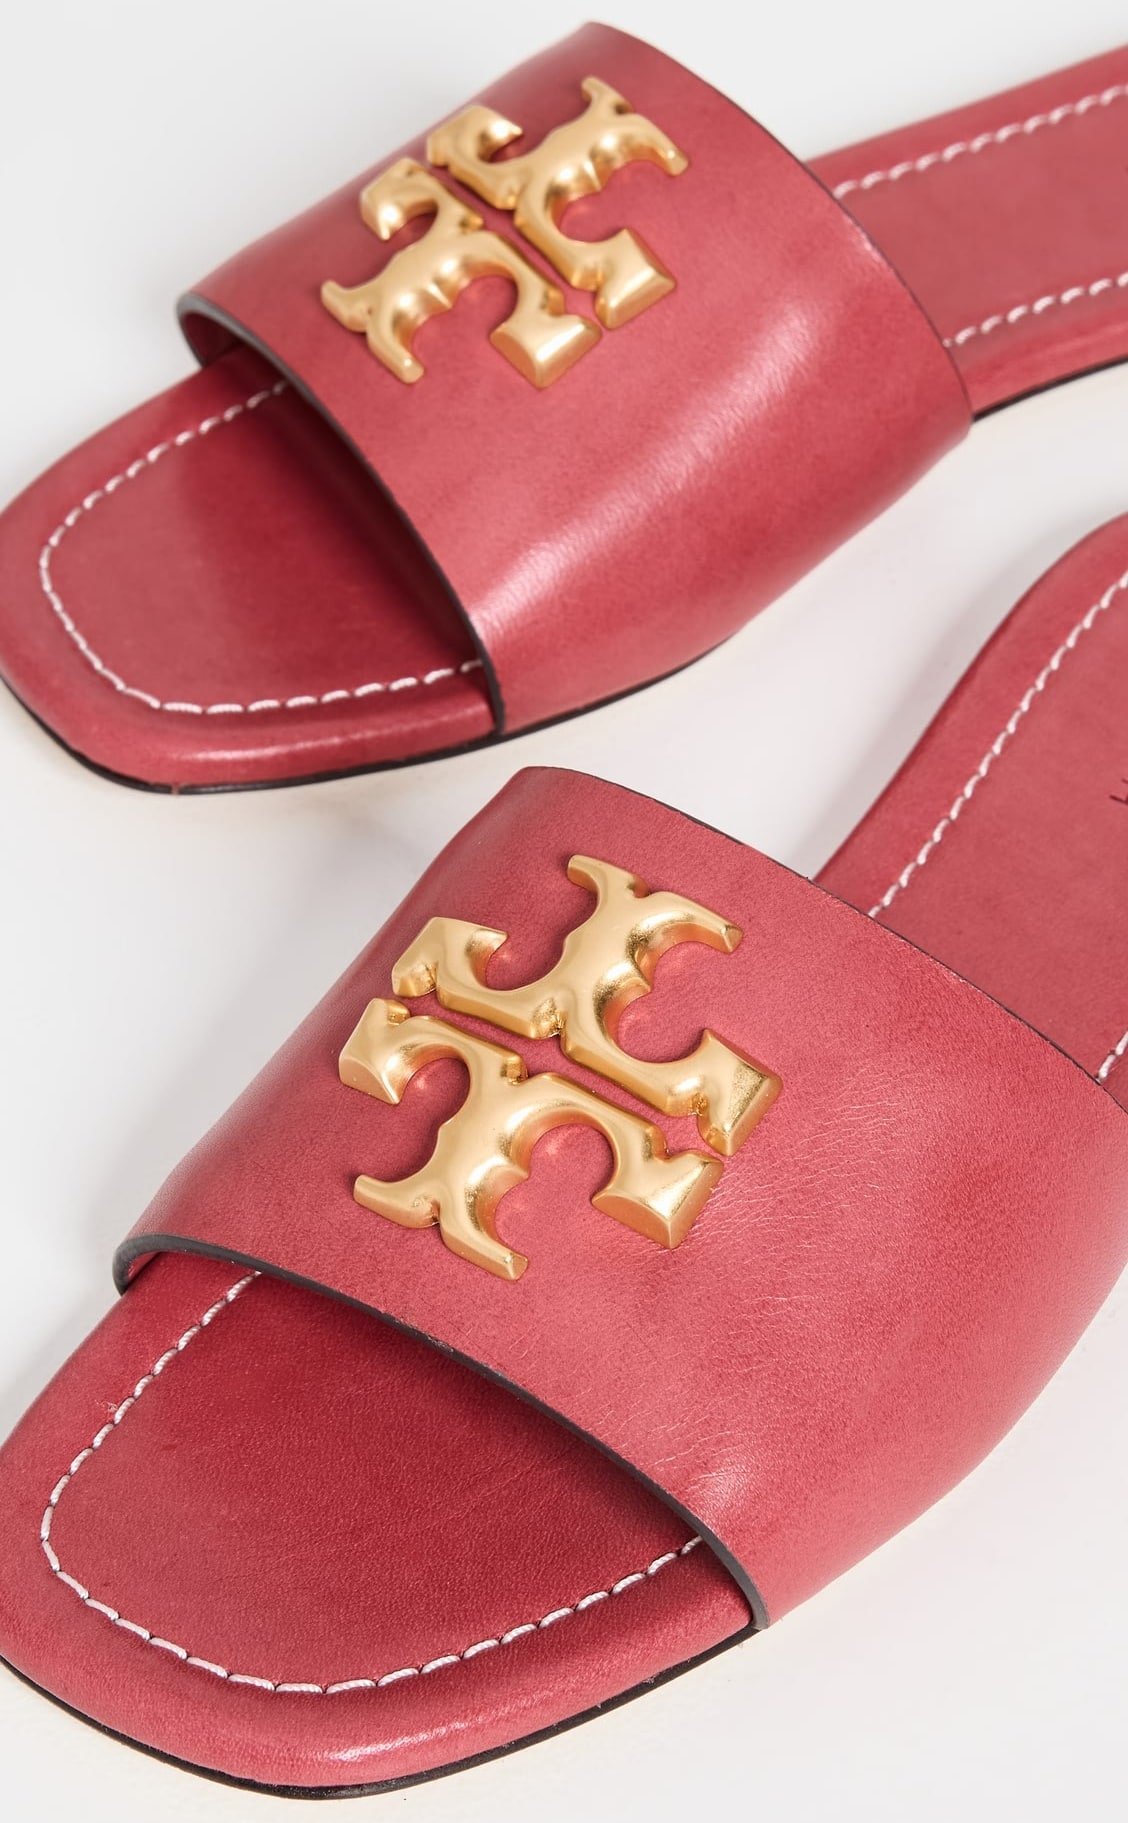 How to Spot Fake vs. Real Tory Burch Shoes: 5 Ways to Check